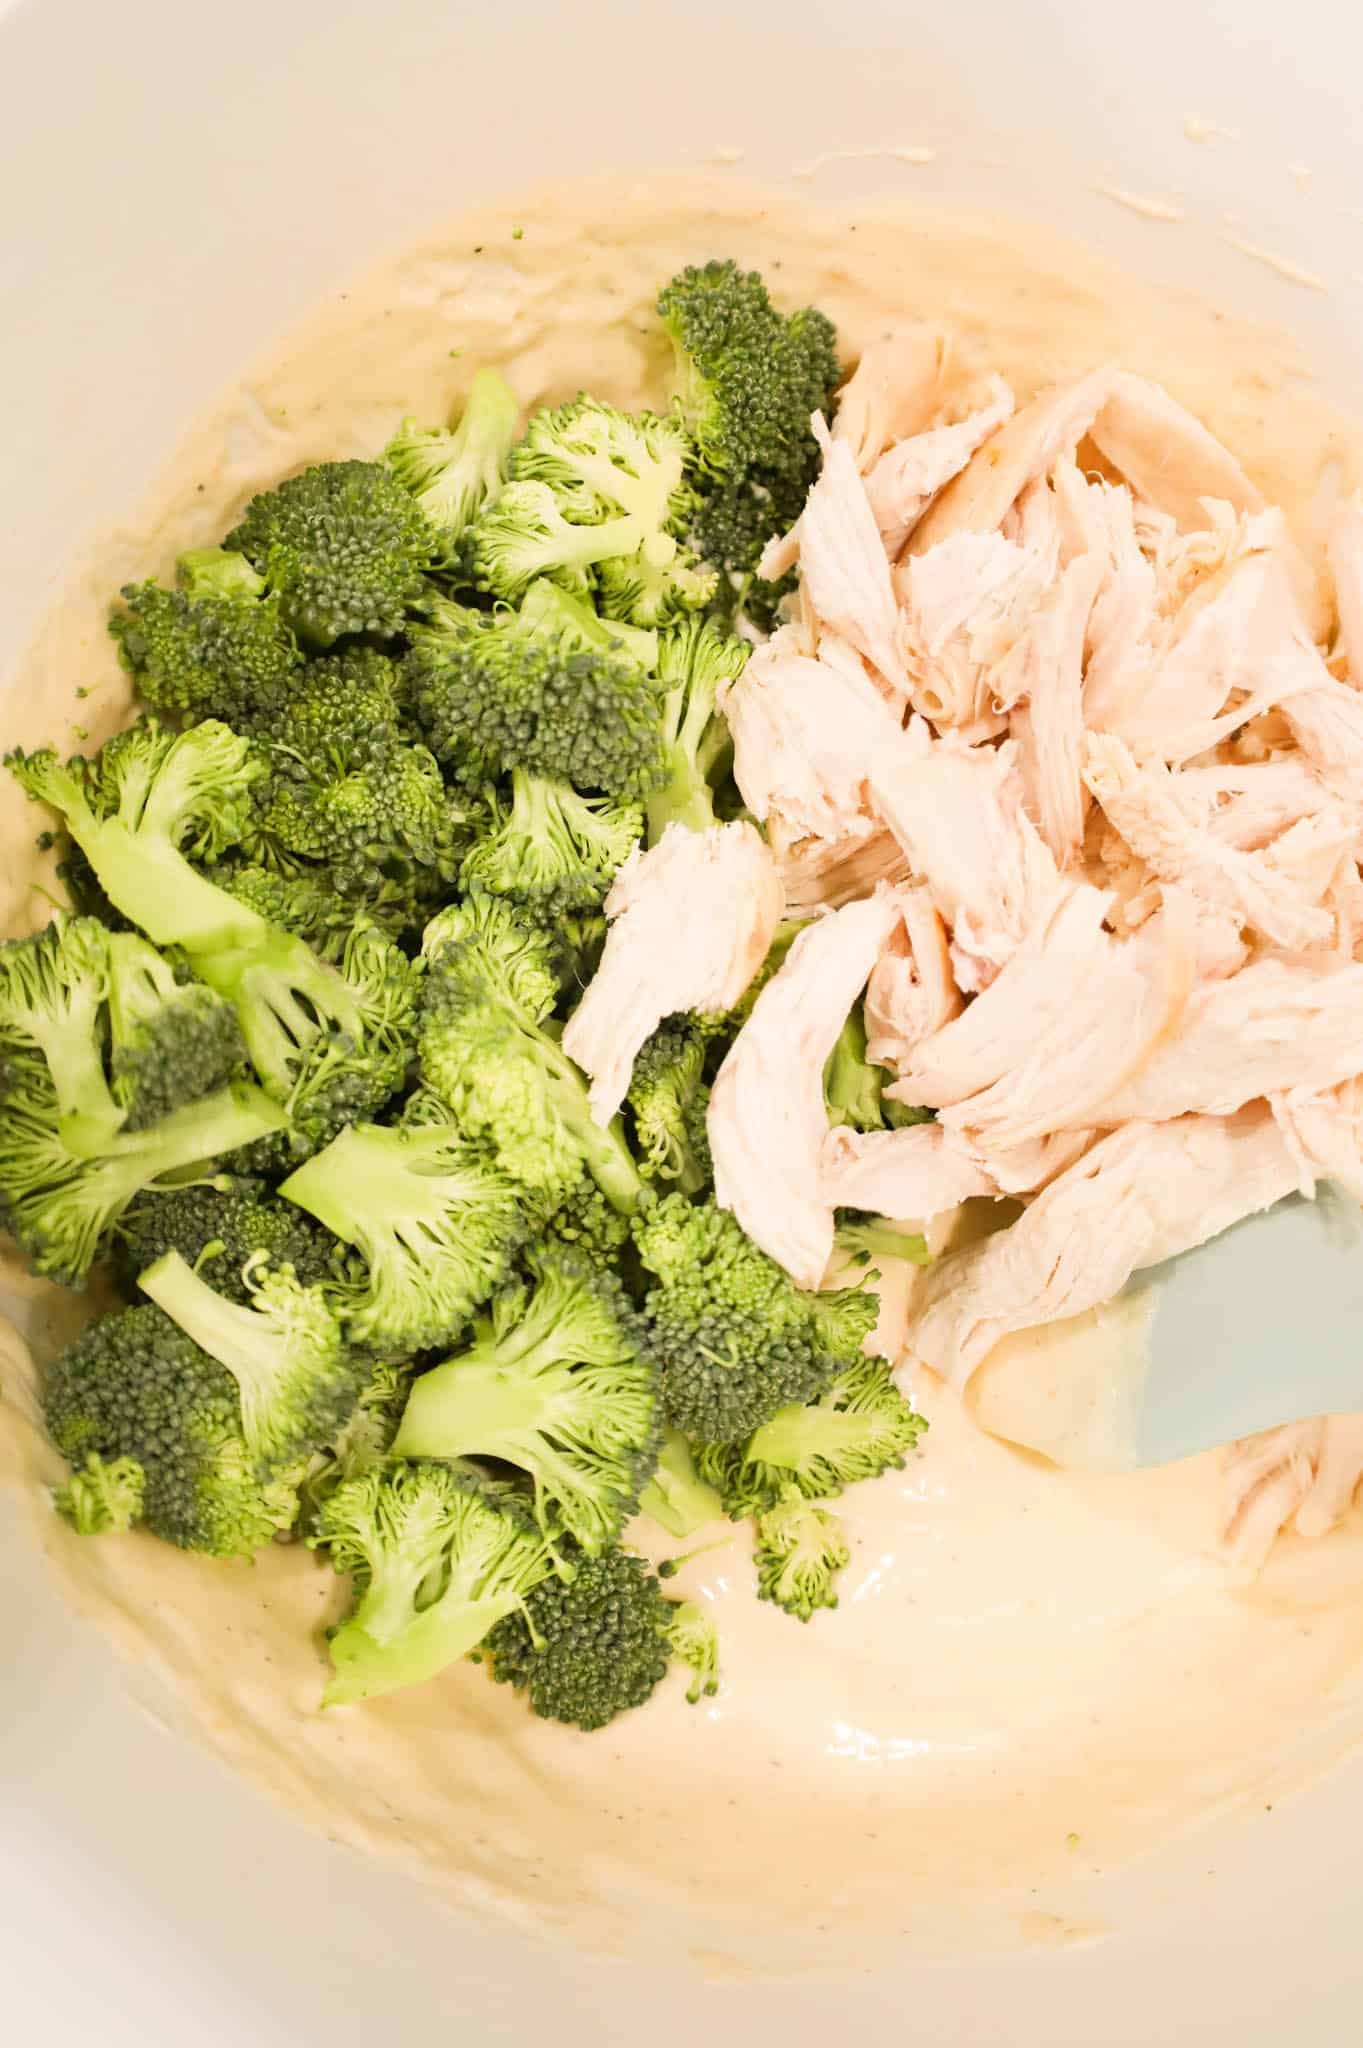 broccoli florets and shredded chicken on top of cream soup mixture in a bowl